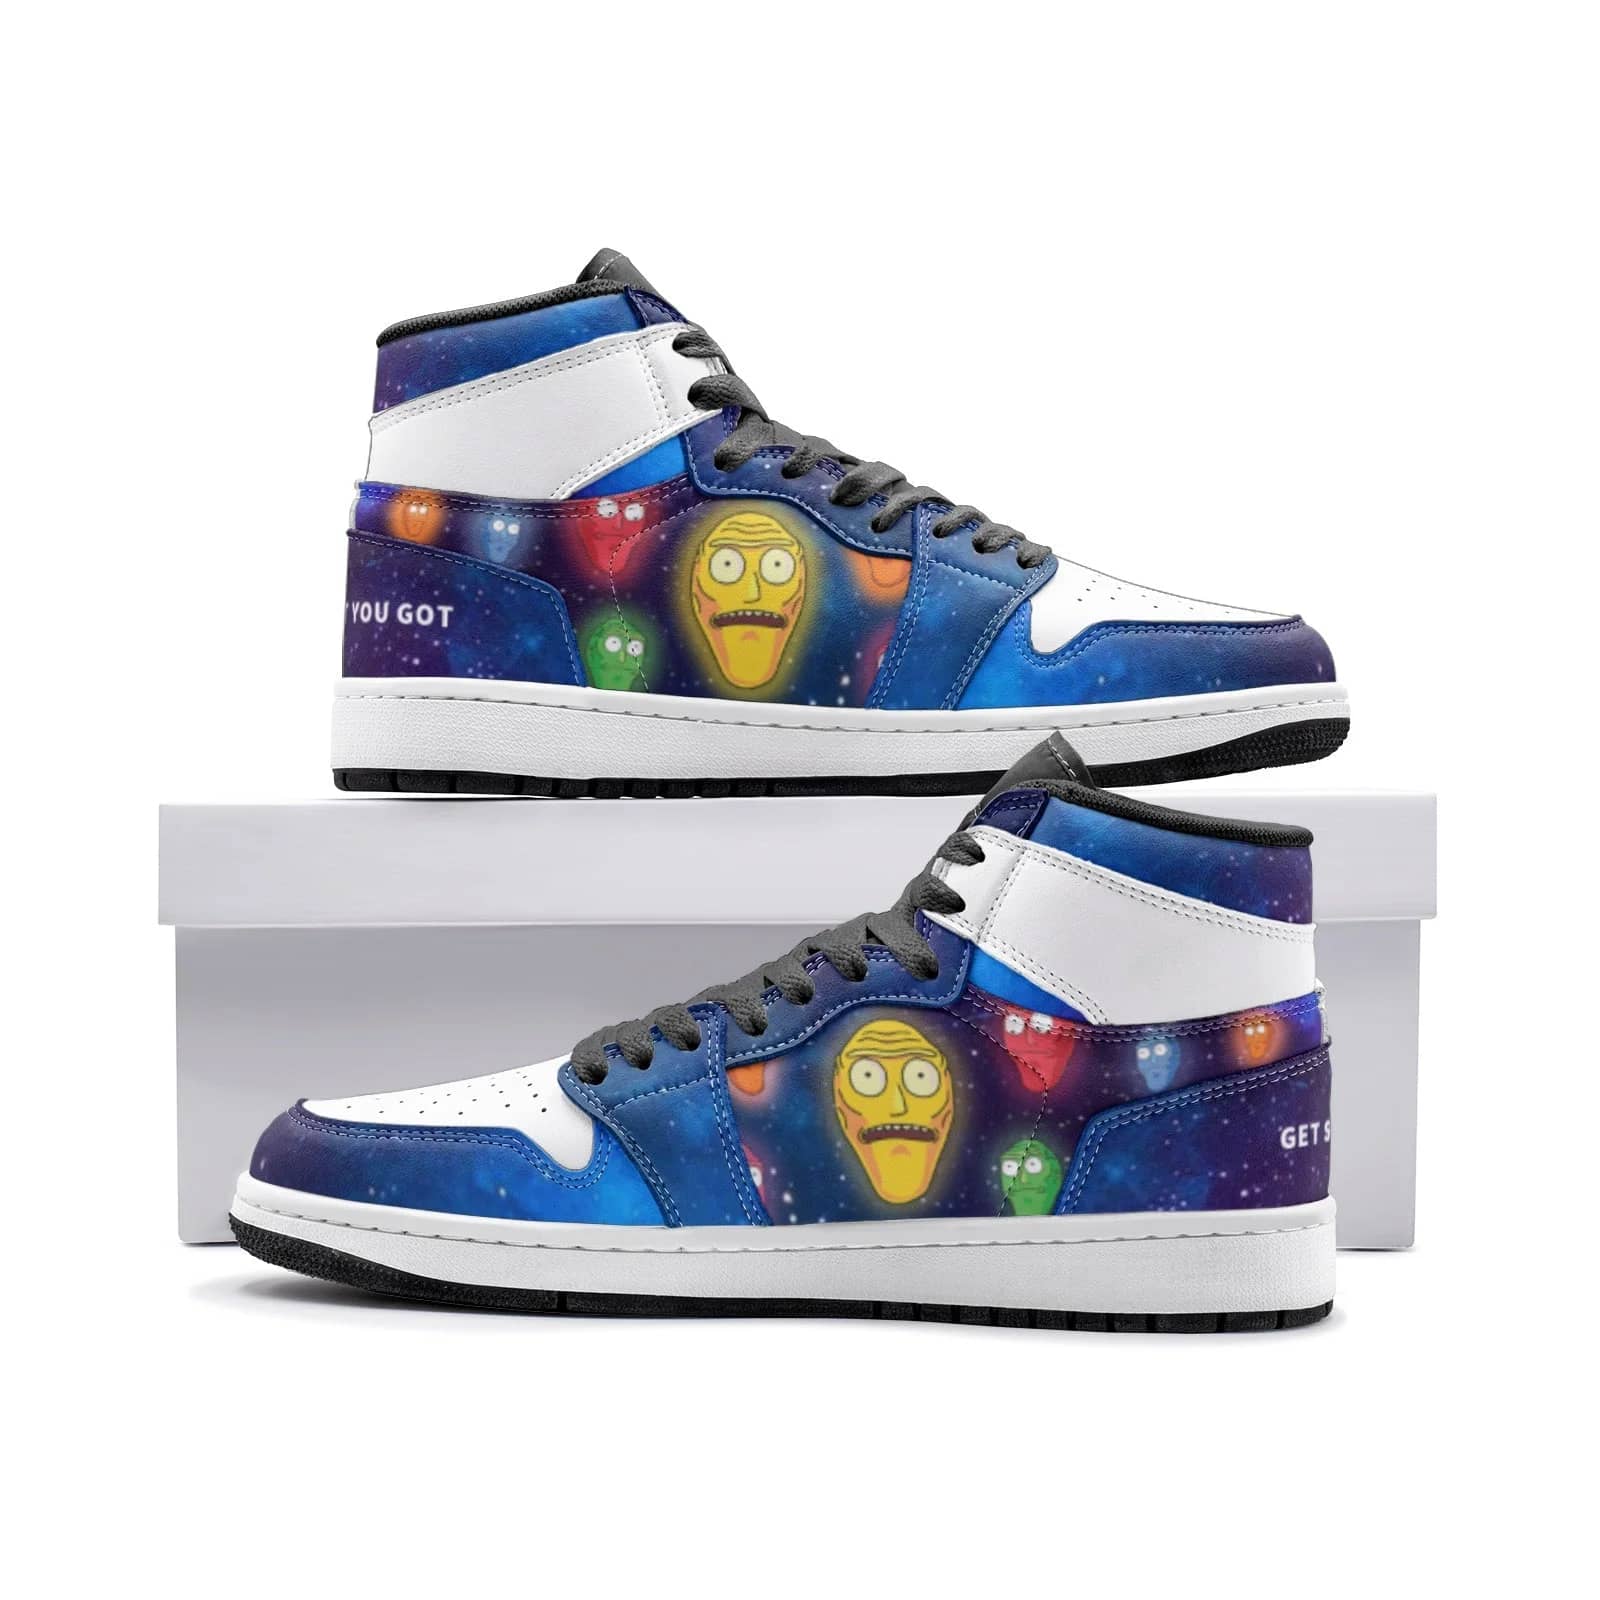 Inktee Store - Show Me What You Got Rick And Morty Air Jordan Shoes Image